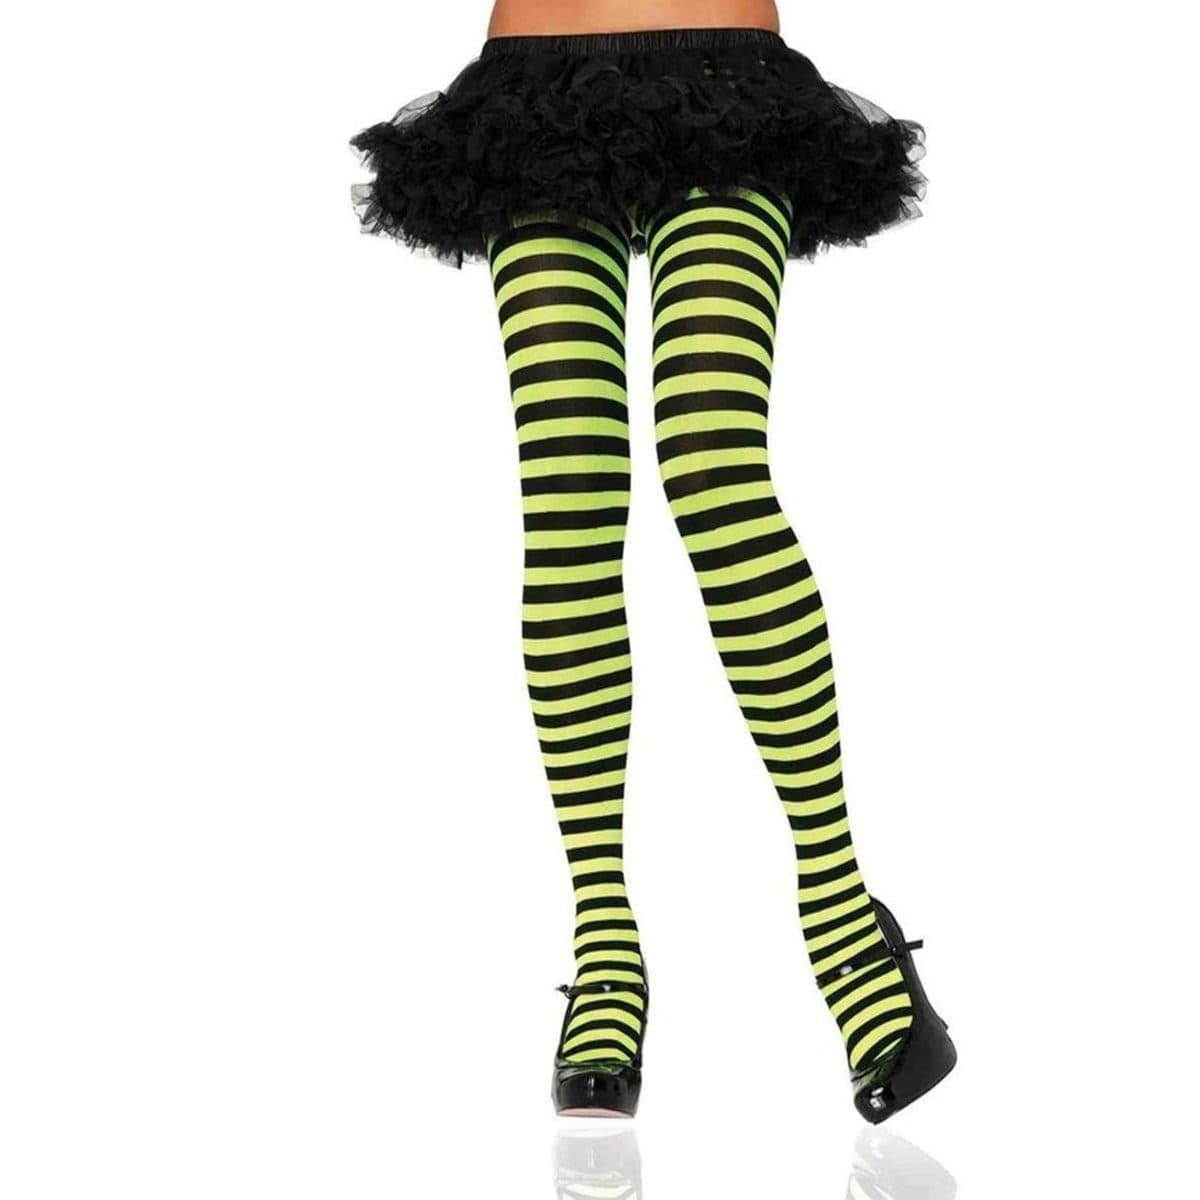 Buy Costume Accessories Black & lime striped nylon tights for women sold at Party Expert